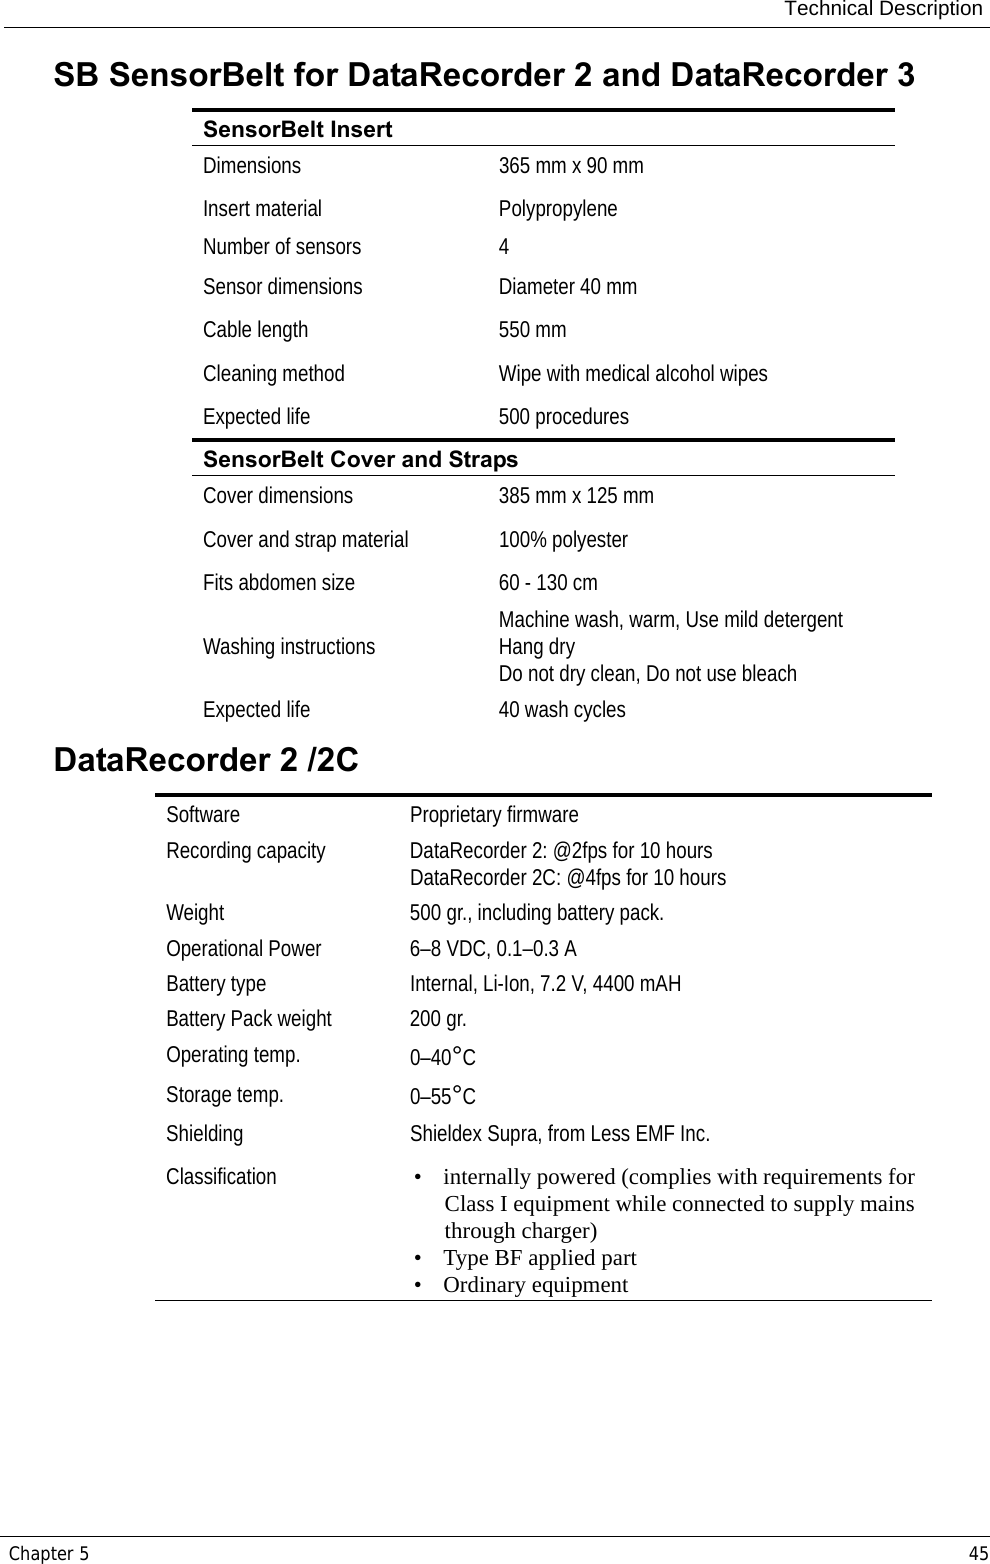 Technical DescriptionChapter 5 45SB SensorBelt for DataRecorder 2 and DataRecorder 3DataRecorder 2 /2C SensorBelt InsertDimensions 365 mm x 90 mmInsert material PolypropyleneNumber of sensors 4Sensor dimensions Diameter 40 mm Cable length 550 mmCleaning method Wipe with medical alcohol wipesExpected life 500 proceduresSensorBelt Cover and StrapsCover dimensions 385 mm x 125 mmCover and strap material 100% polyesterFits abdomen size 60 - 130 cmWashing instructions Machine wash, warm, Use mild detergentHang dryDo not dry clean, Do not use bleachExpected life 40 wash cyclesSoftware Proprietary firmwareRecording capacity DataRecorder 2: @2fps for 10 hours DataRecorder 2C: @4fps for 10 hoursWeight 500 gr., including battery pack.Operational Power  6–8 VDC, 0.1–0.3 A Battery type Internal, Li-Ion, 7.2 V, 4400 mAHBattery Pack weight 200 gr.Operating temp. 0–40°CStorage temp. 0–55°CShielding Shieldex Supra, from Less EMF Inc.Classification • internally powered (complies with requirements for Class I equipment while connected to supply mains through charger)• Type BF applied part• Ordinary equipment